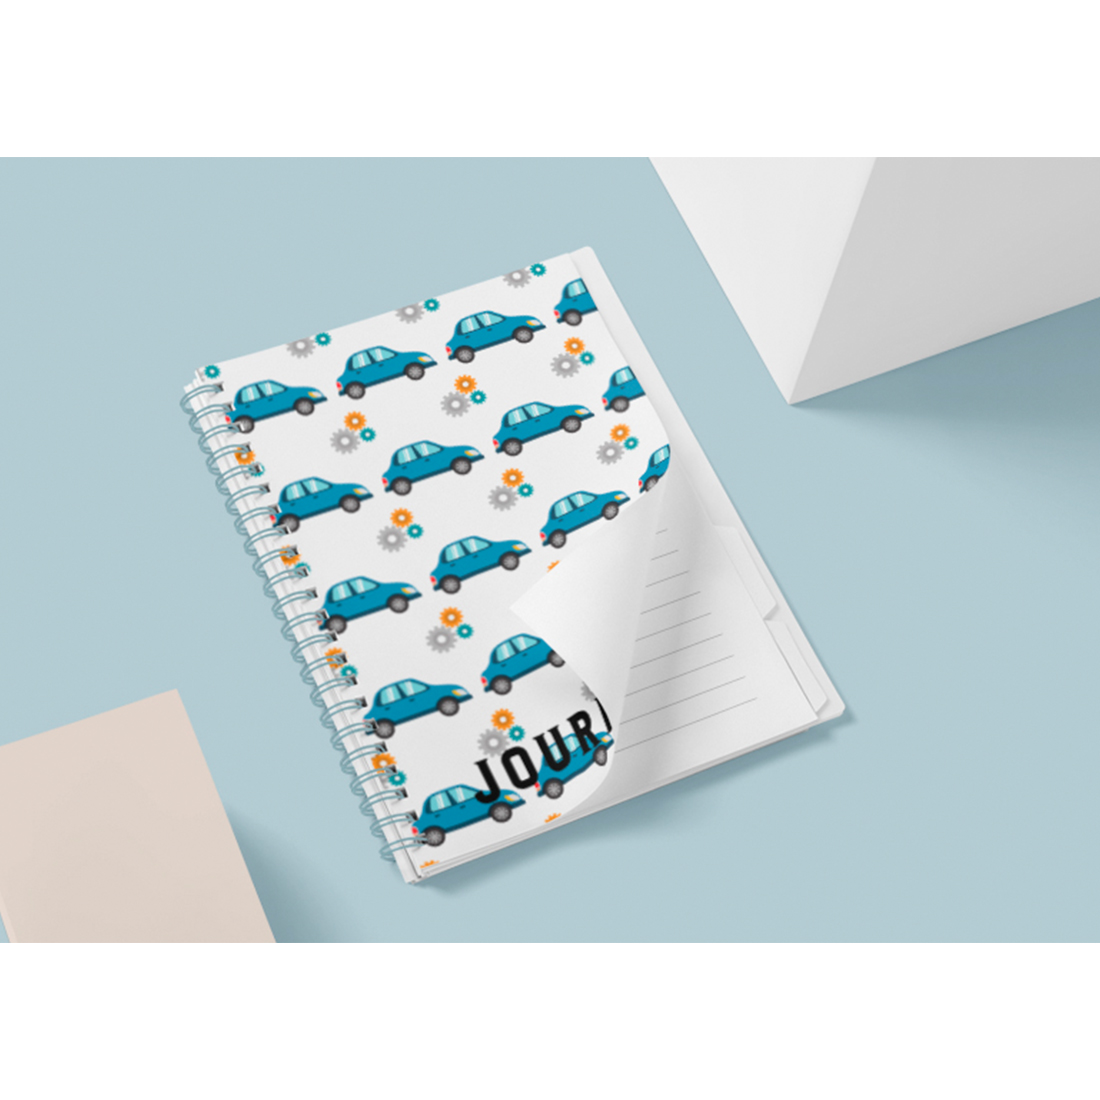 Blue cars on a notebook cover.